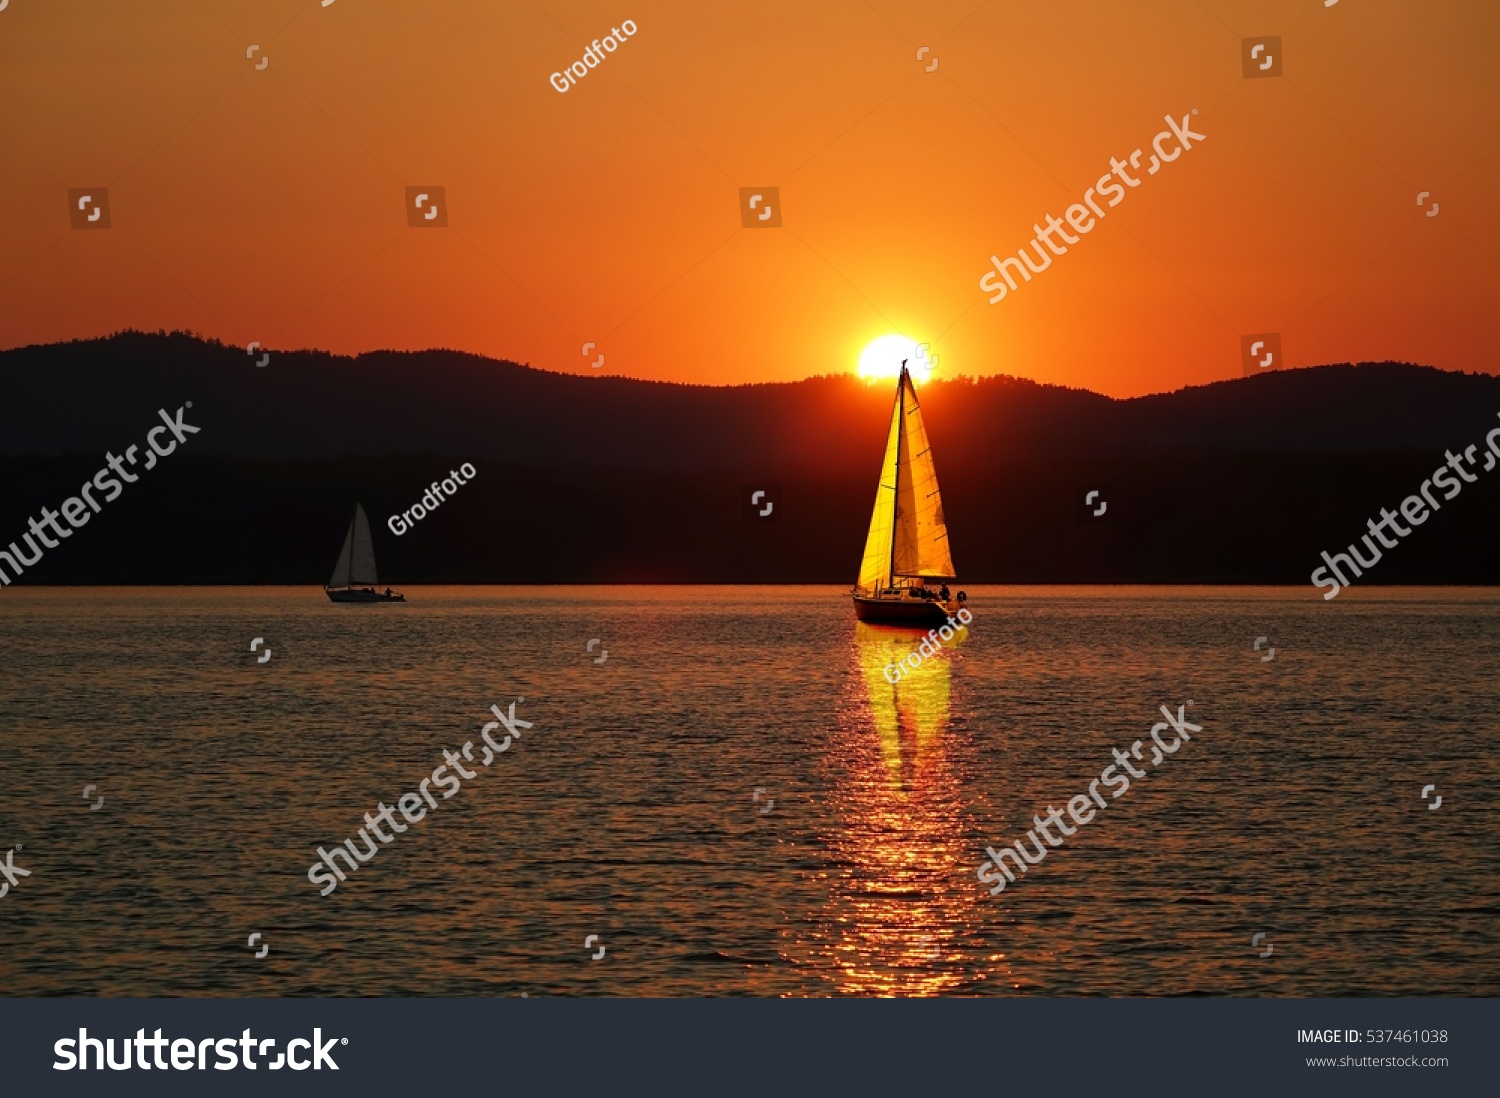 Sailboats on the beautiful Lake of the Southern Urals.Sailboat in the sunset.Summer travel.                               #537461038